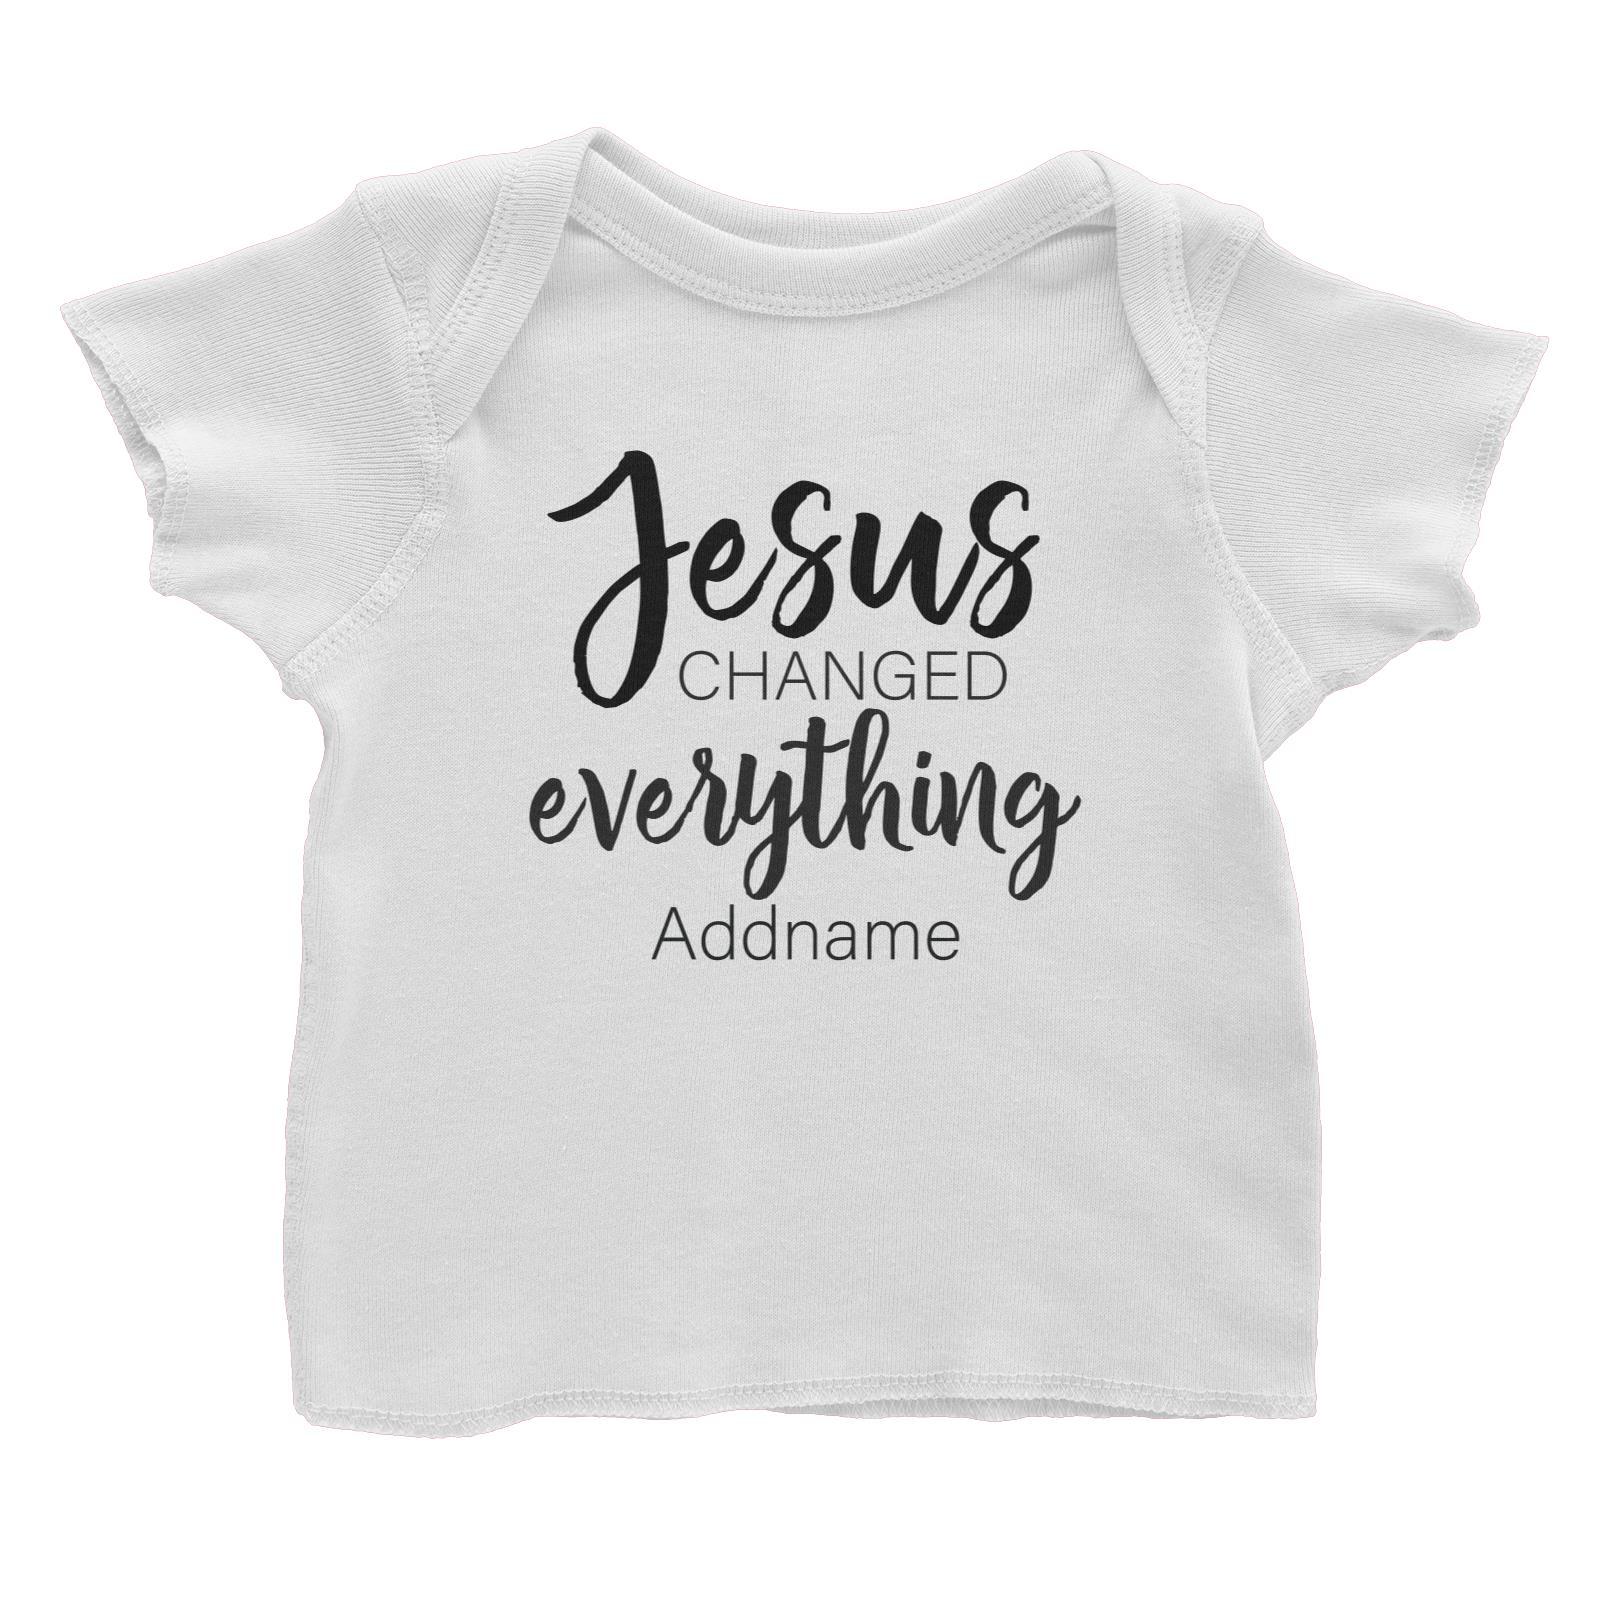 Christian Series Jesus Changed Everthing Addname Baby T-Shirt